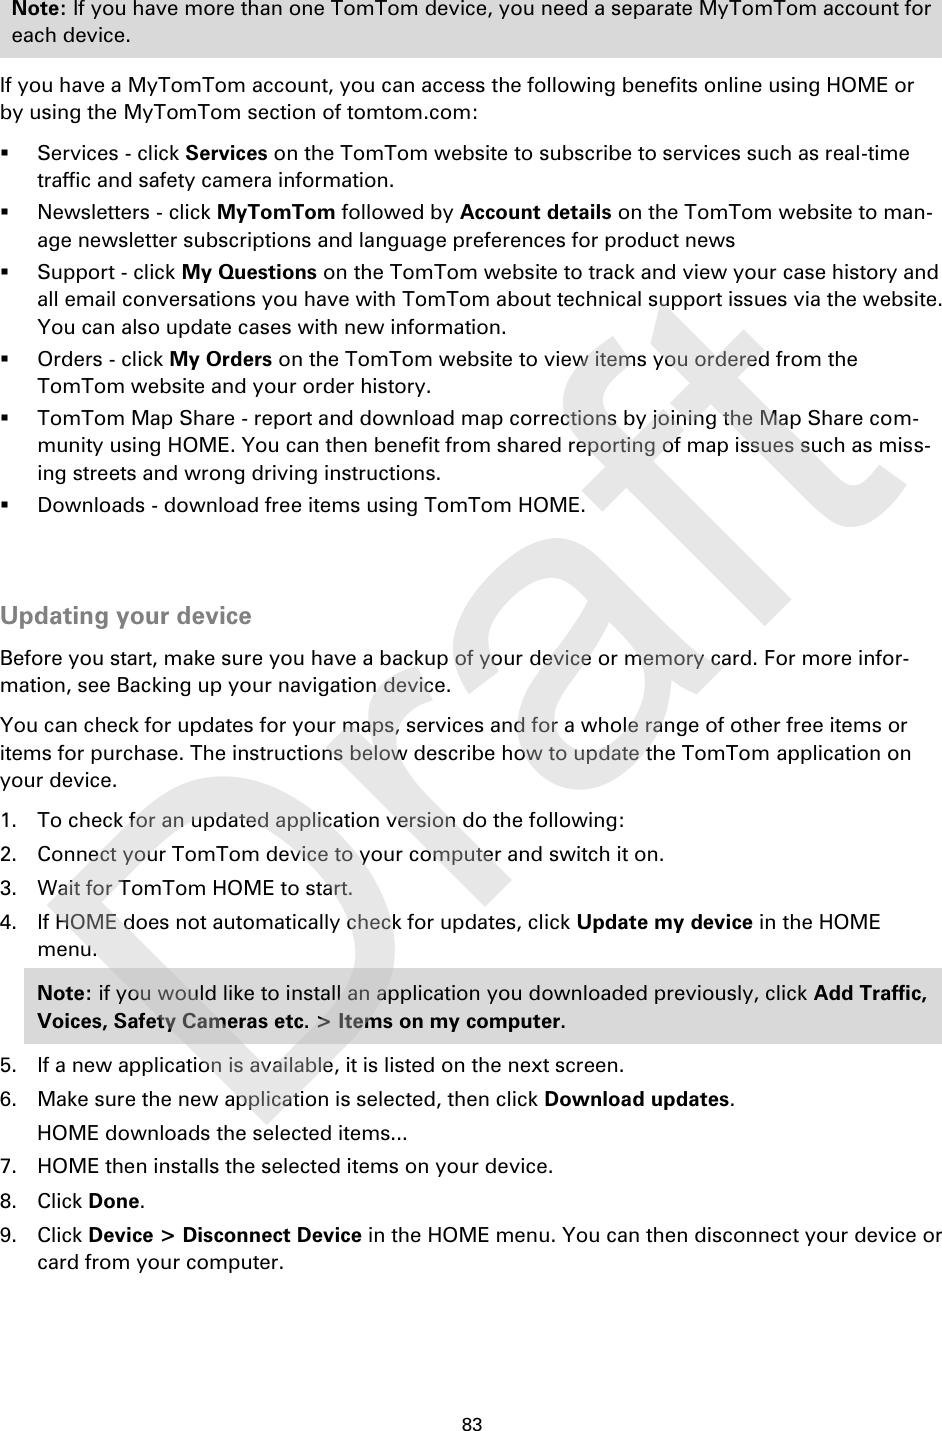 83    Note: If you have more than one TomTom device, you need a separate MyTomTom account for each device. If you have a MyTomTom account, you can access the following benefits online using HOME or by using the MyTomTom section of tomtom.com:  Services - click Services on the TomTom website to subscribe to services such as real-time traffic and safety camera information.  Newsletters - click MyTomTom followed by Account details on the TomTom website to man-age newsletter subscriptions and language preferences for product news  Support - click My Questions on the TomTom website to track and view your case history and all email conversations you have with TomTom about technical support issues via the website. You can also update cases with new information.  Orders - click My Orders on the TomTom website to view items you ordered from the TomTom website and your order history.  TomTom Map Share - report and download map corrections by joining the Map Share com-munity using HOME. You can then benefit from shared reporting of map issues such as miss-ing streets and wrong driving instructions.    Downloads - download free items using TomTom HOME.   Updating your device Before you start, make sure you have a backup of your device or memory card. For more infor-mation, see Backing up your navigation device. You can check for updates for your maps, services and for a whole range of other free items or items for purchase. The instructions below describe how to update the TomTom application on your device. 1. To check for an updated application version do the following: 2. Connect your TomTom device to your computer and switch it on. 3. Wait for TomTom HOME to start. 4. If HOME does not automatically check for updates, click Update my device in the HOME menu. Note: if you would like to install an application you downloaded previously, click Add Traffic, Voices, Safety Cameras etc. &gt; Items on my computer. 5. If a new application is available, it is listed on the next screen. 6. Make sure the new application is selected, then click Download updates. HOME downloads the selected items... 7. HOME then installs the selected items on your device. 8. Click Done. 9. Click Device &gt; Disconnect Device in the HOME menu. You can then disconnect your device or card from your computer.    Draft